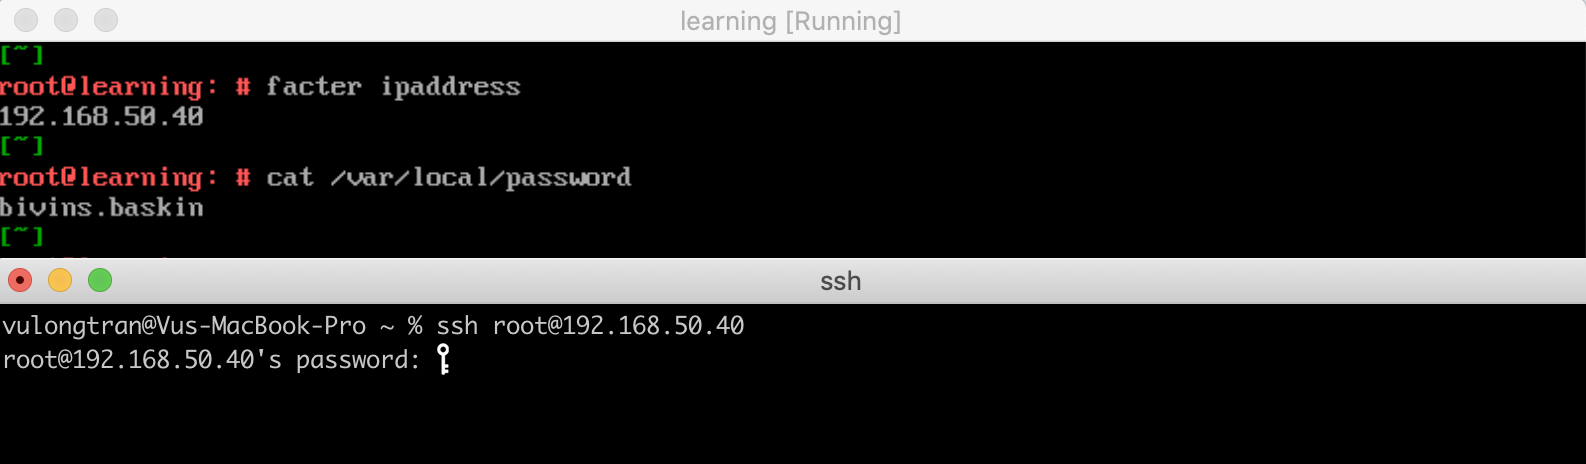 puppet-learning-vm-ssh-example